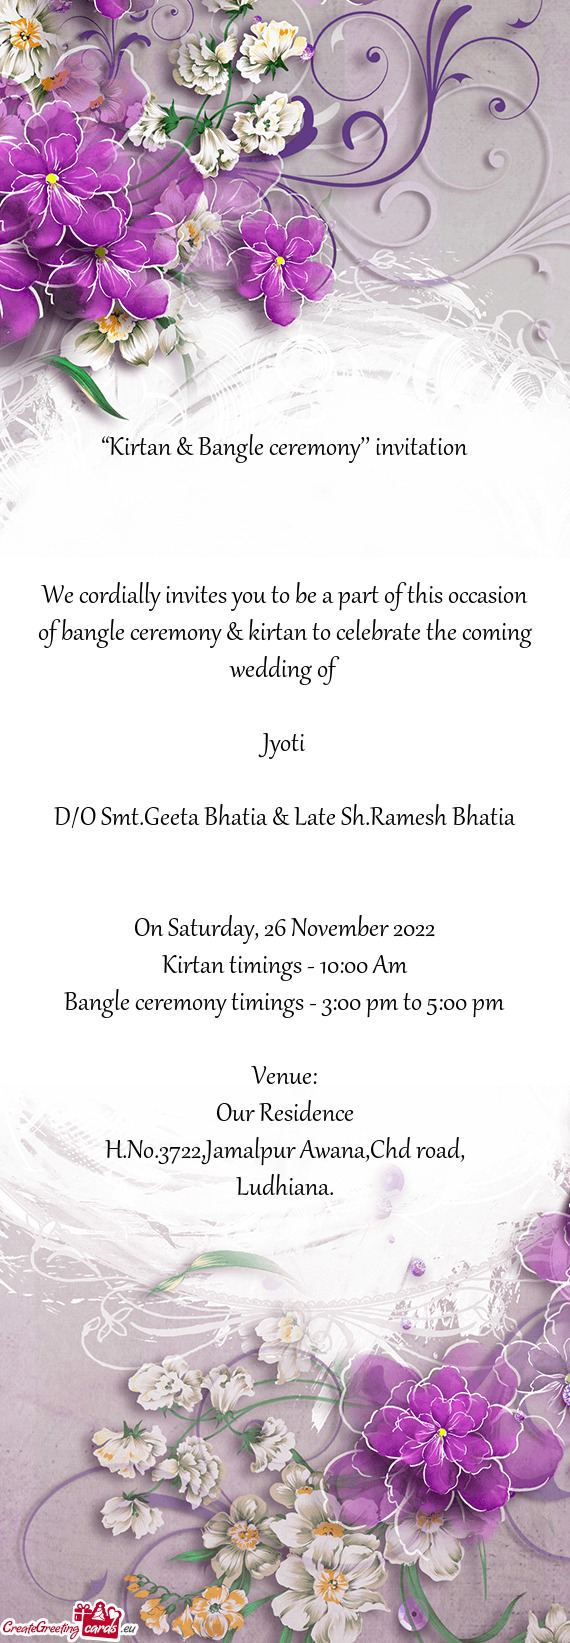 We cordially invites you to be a part of this occasion of bangle ceremony & kirtan to celebrate the